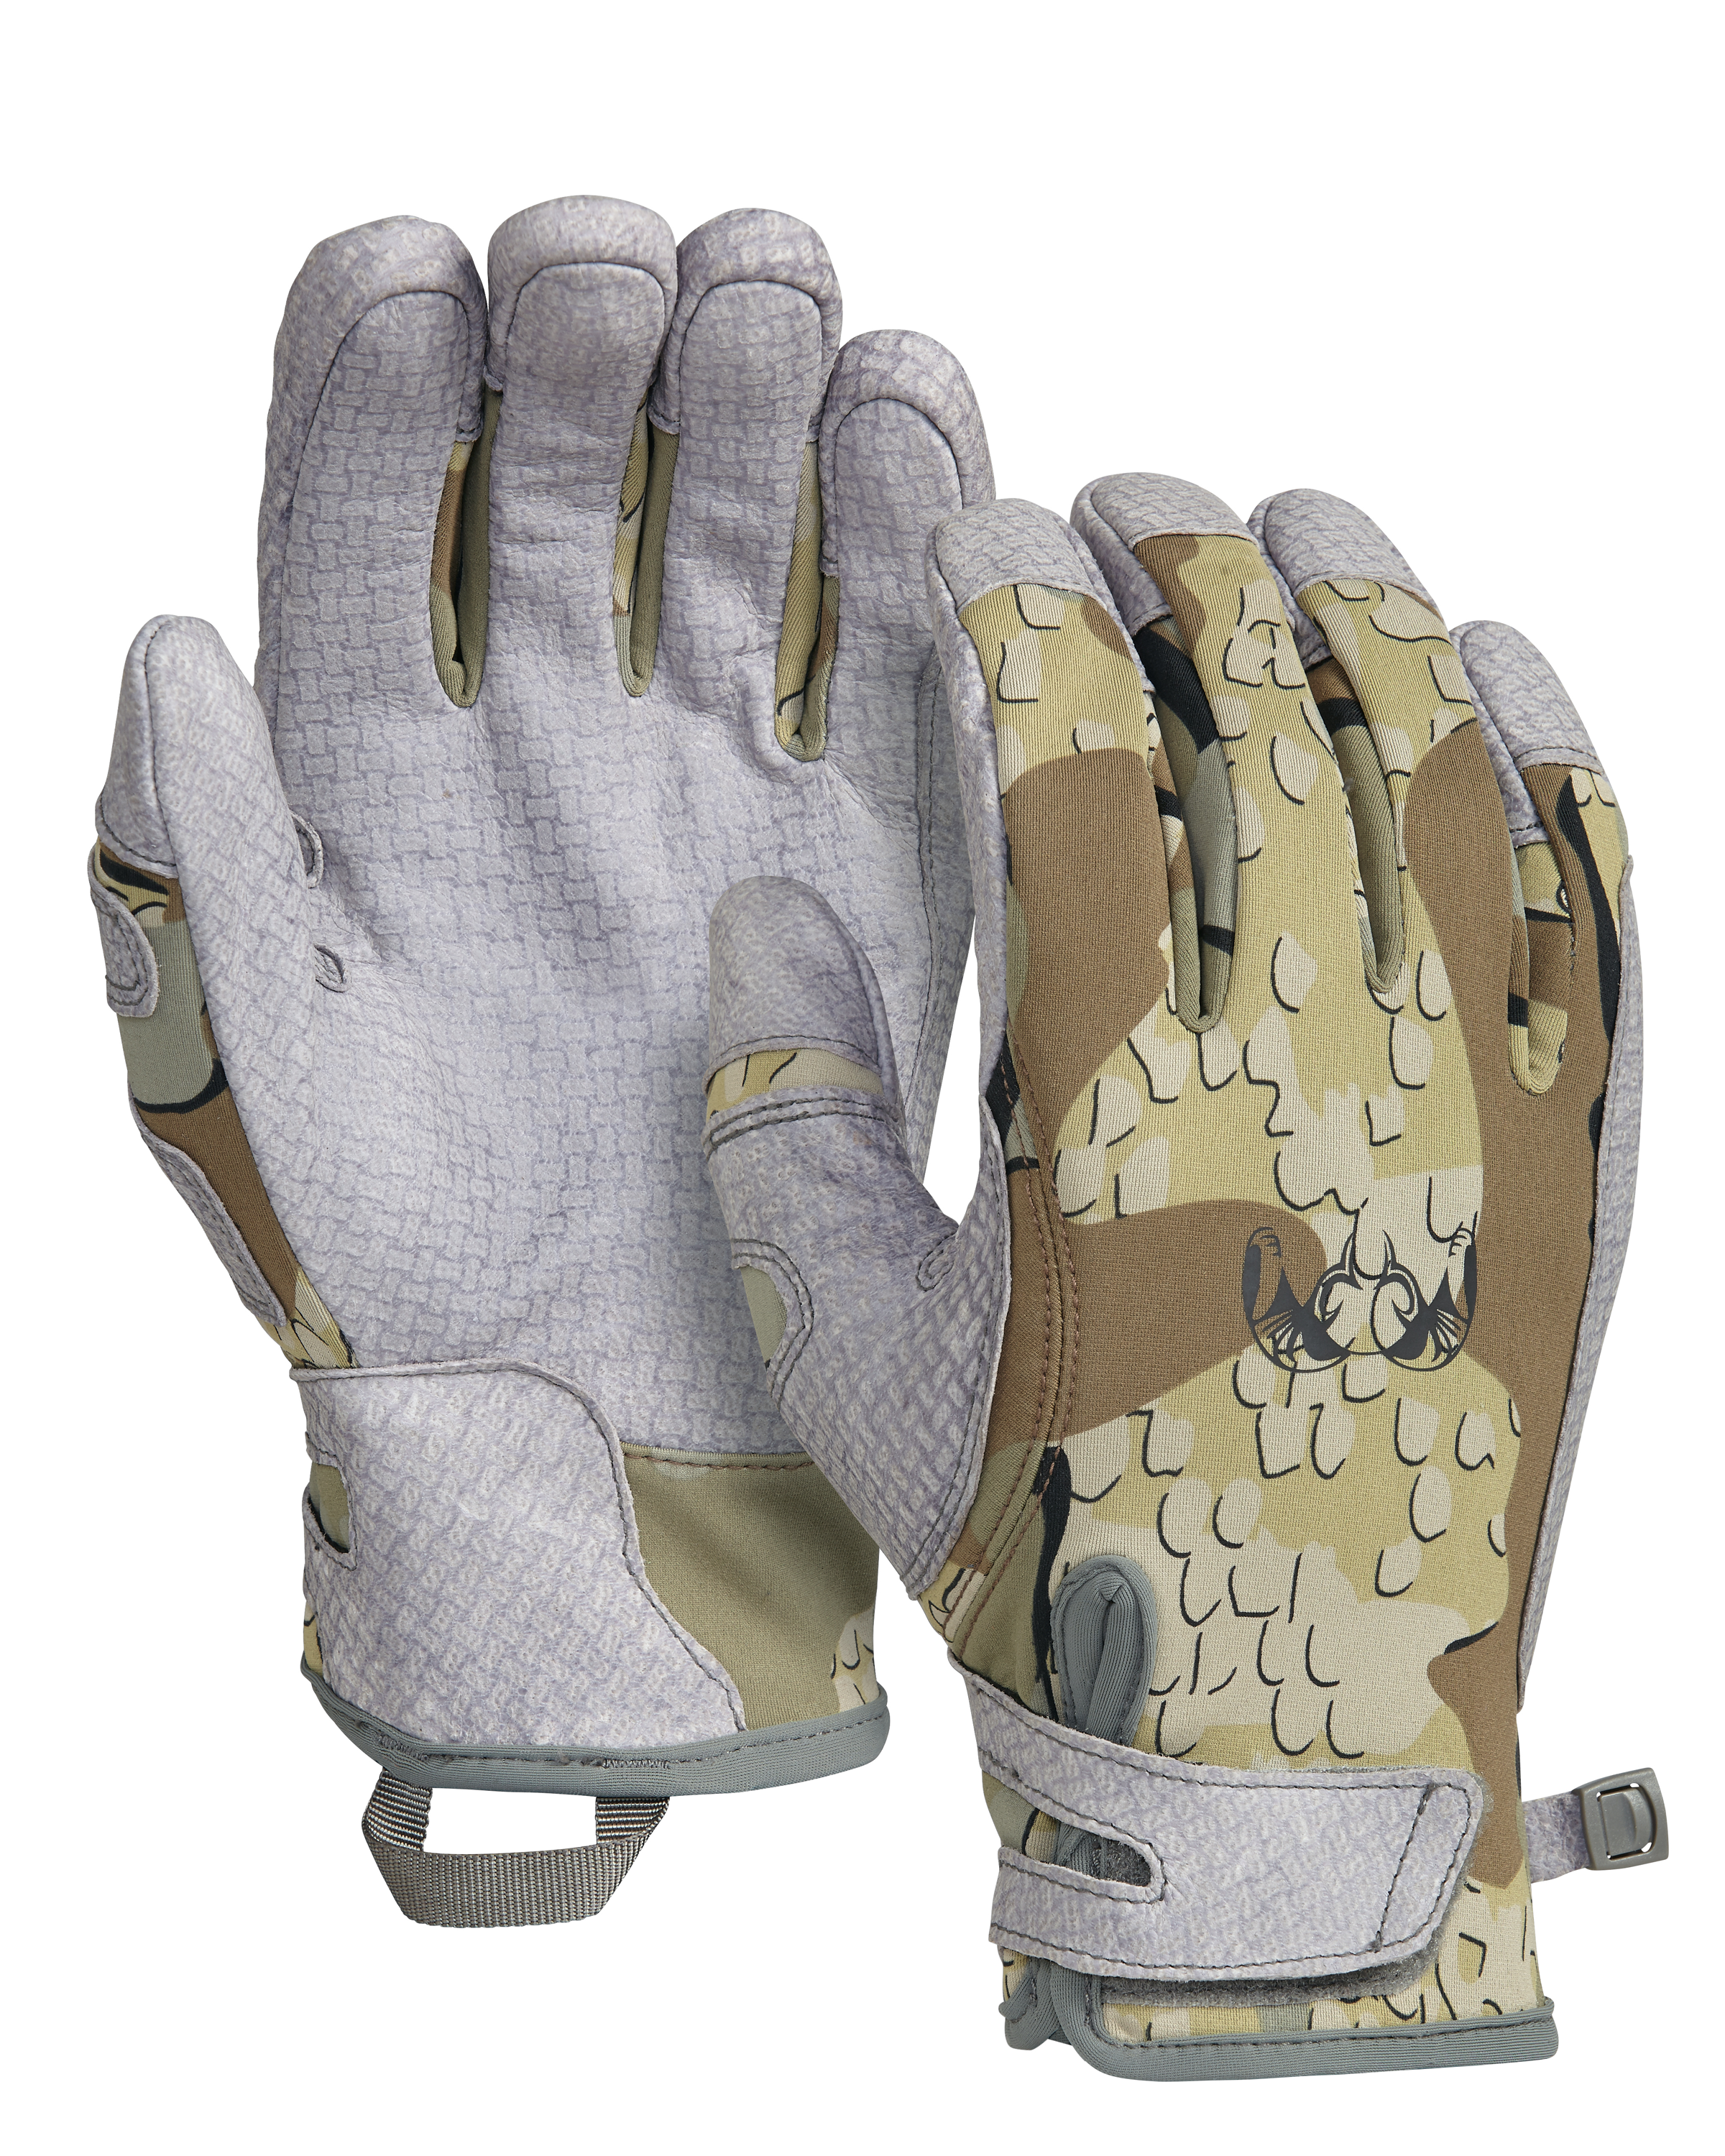 KUIU Guide X Hunting Glove in Valo | Large